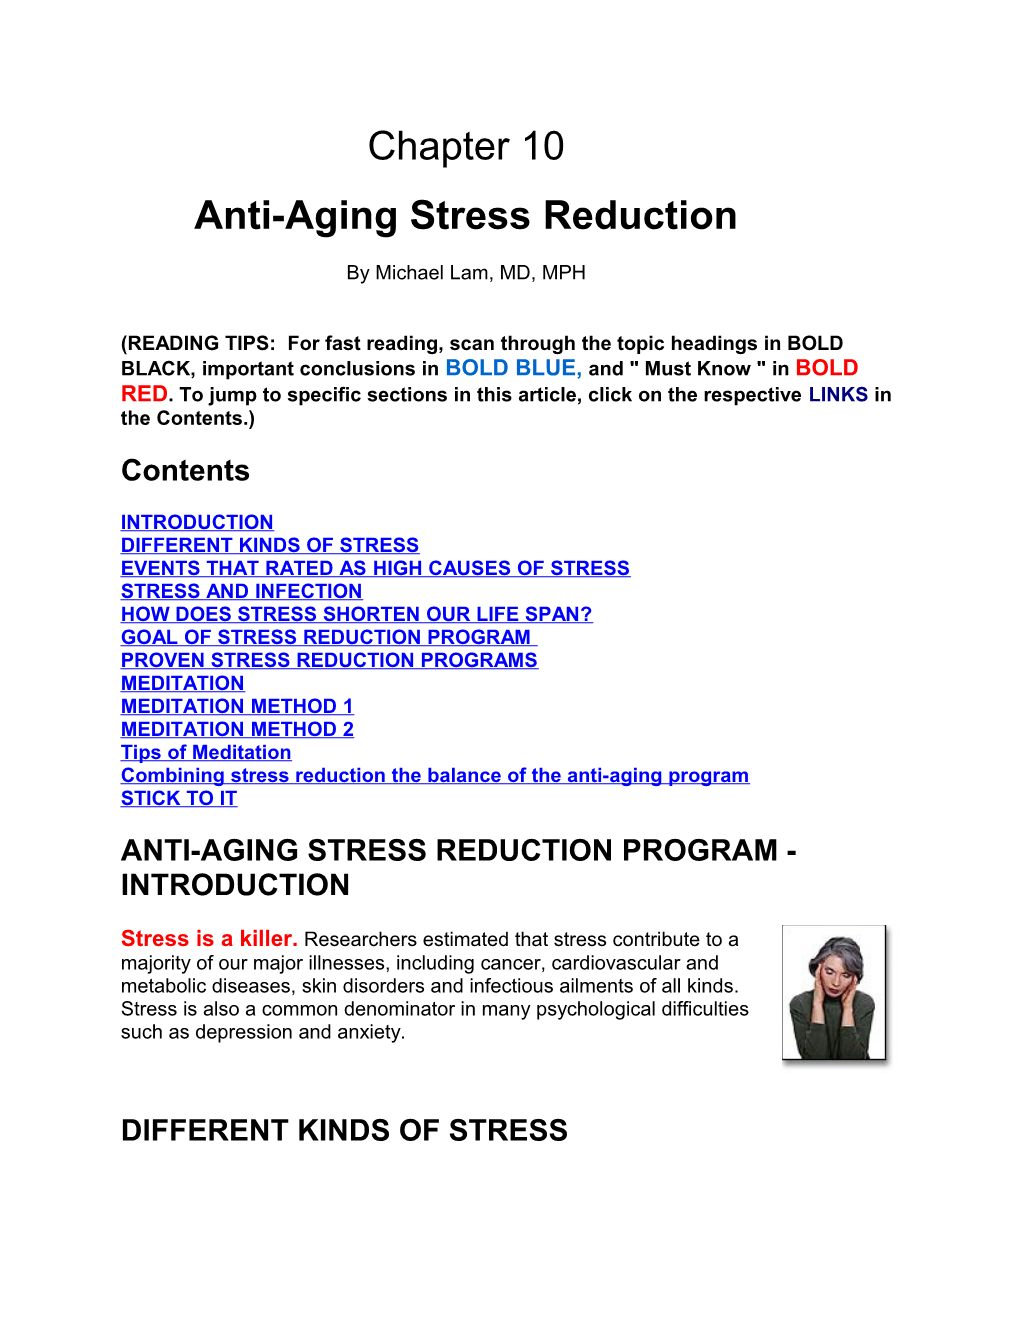 Anti-Aging Stress Reduction Program - Introduction